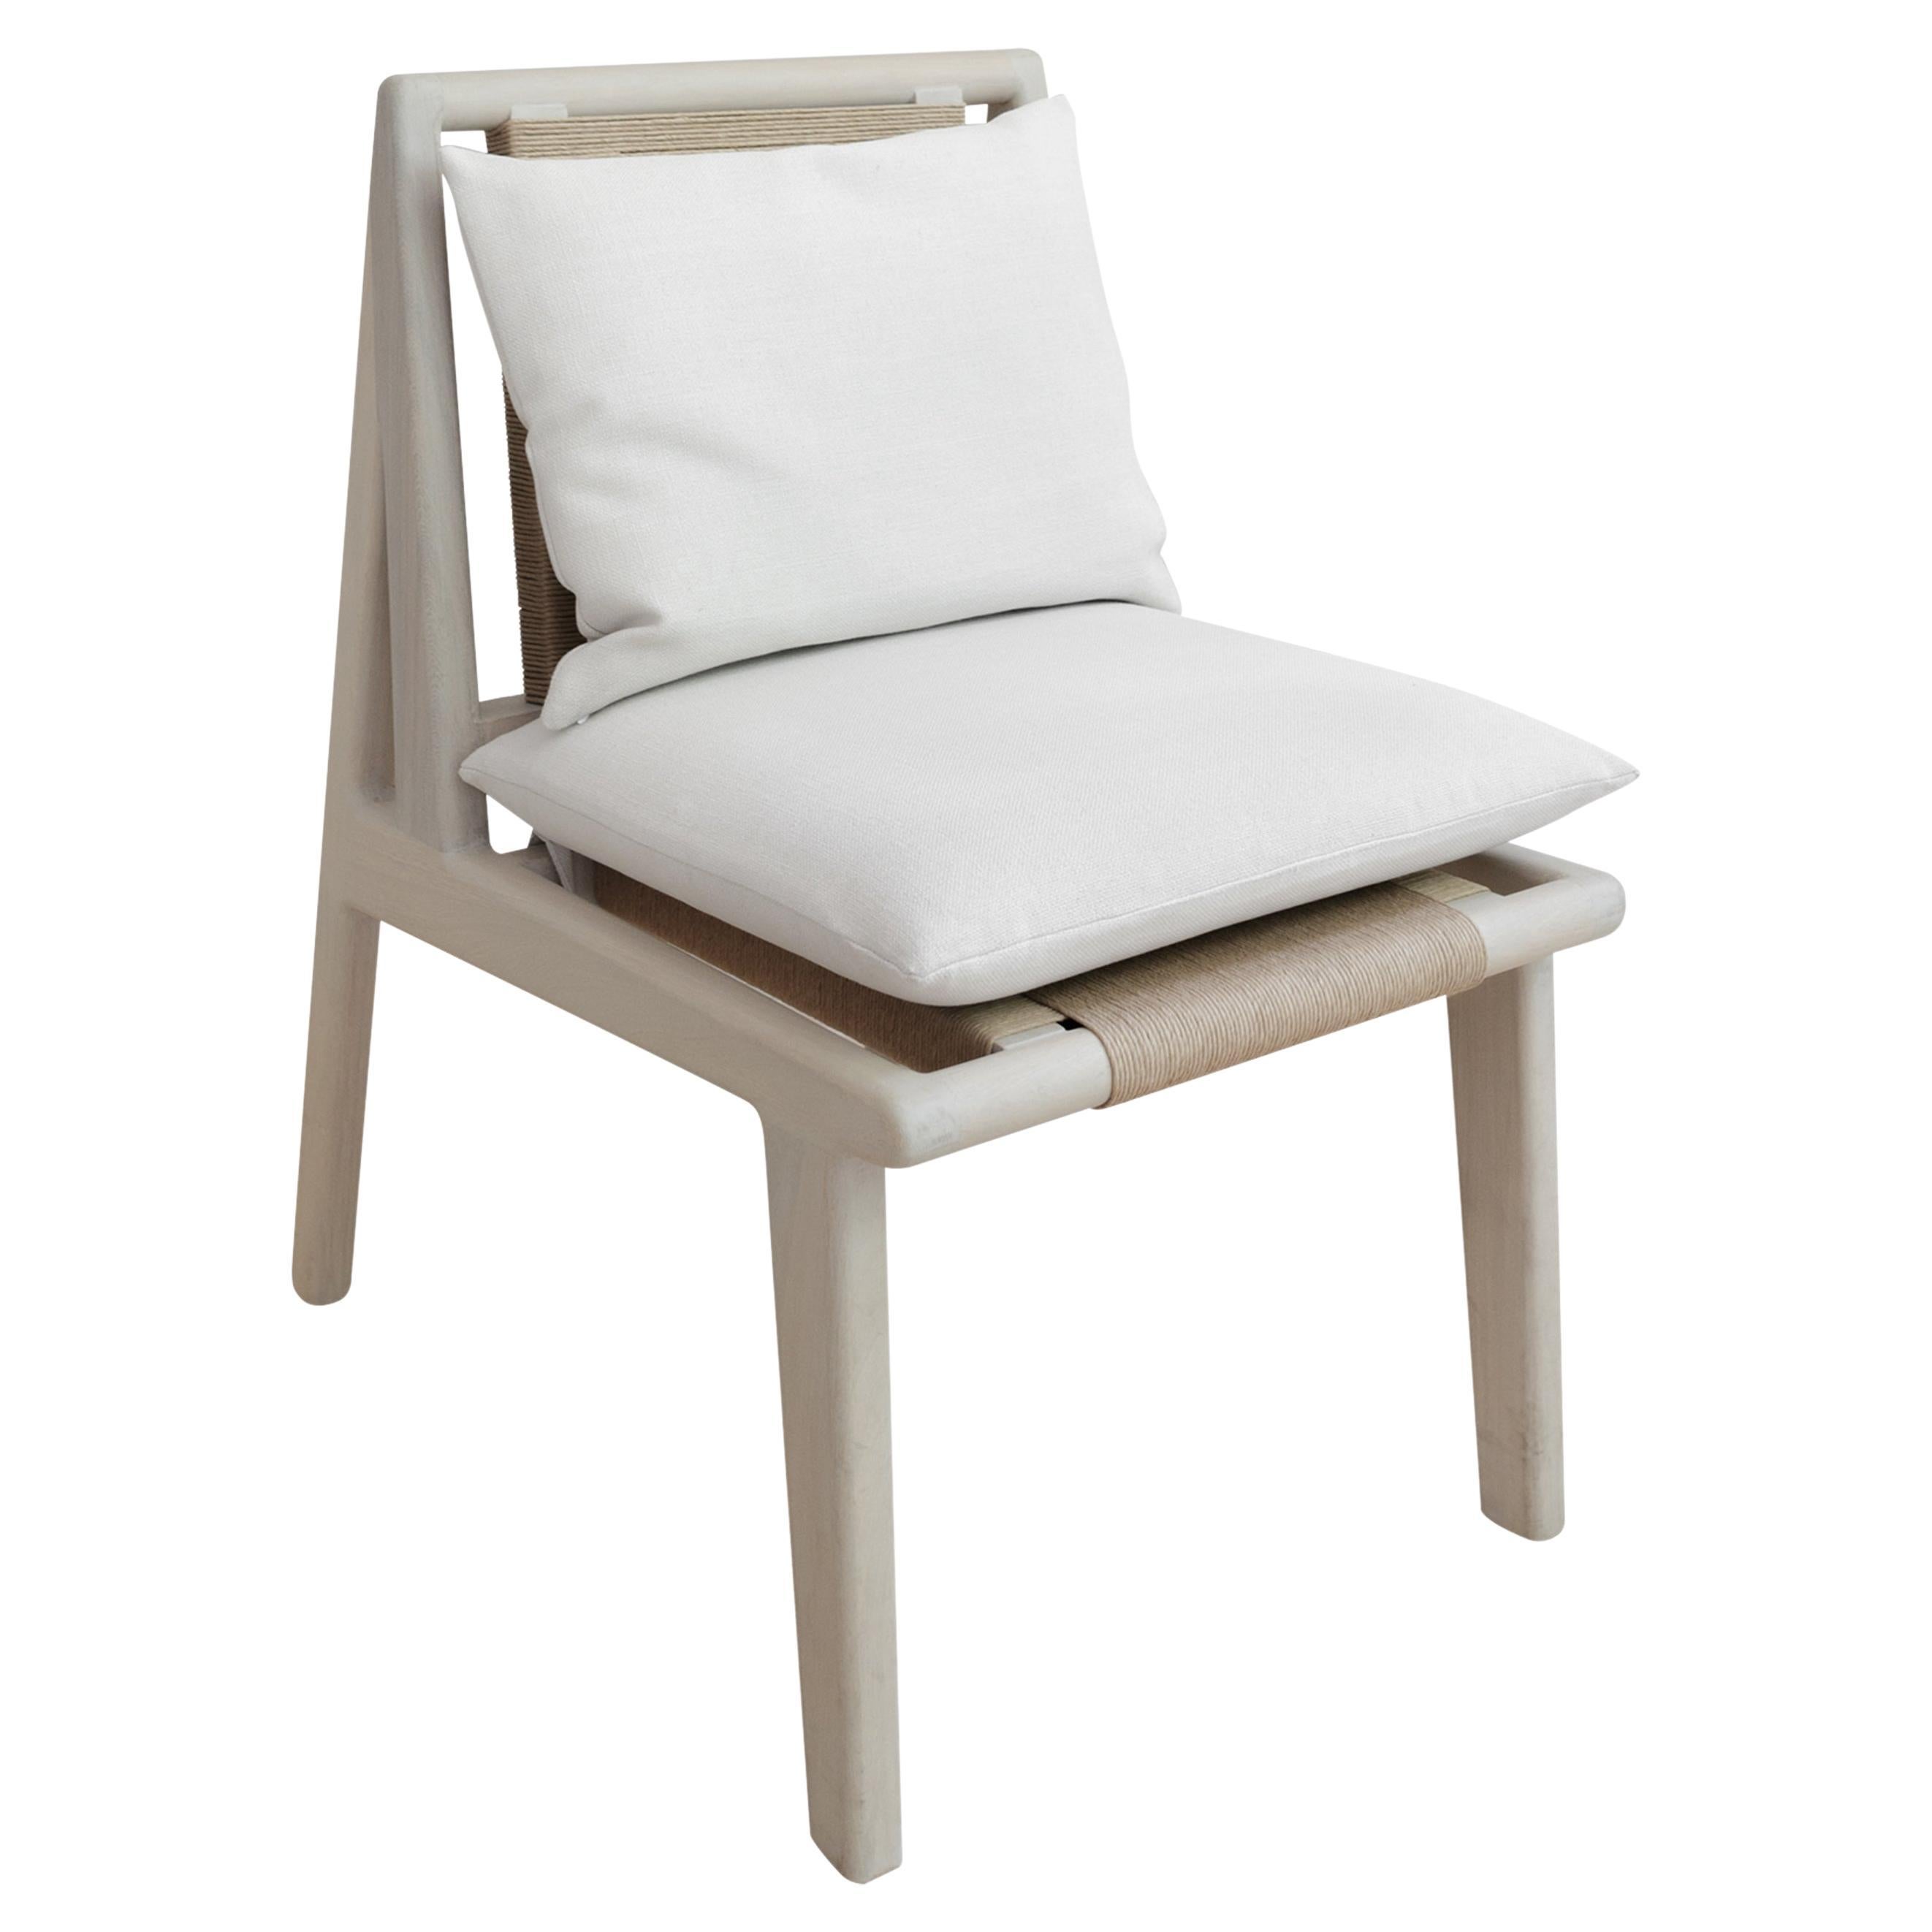 Colima Wood Chair